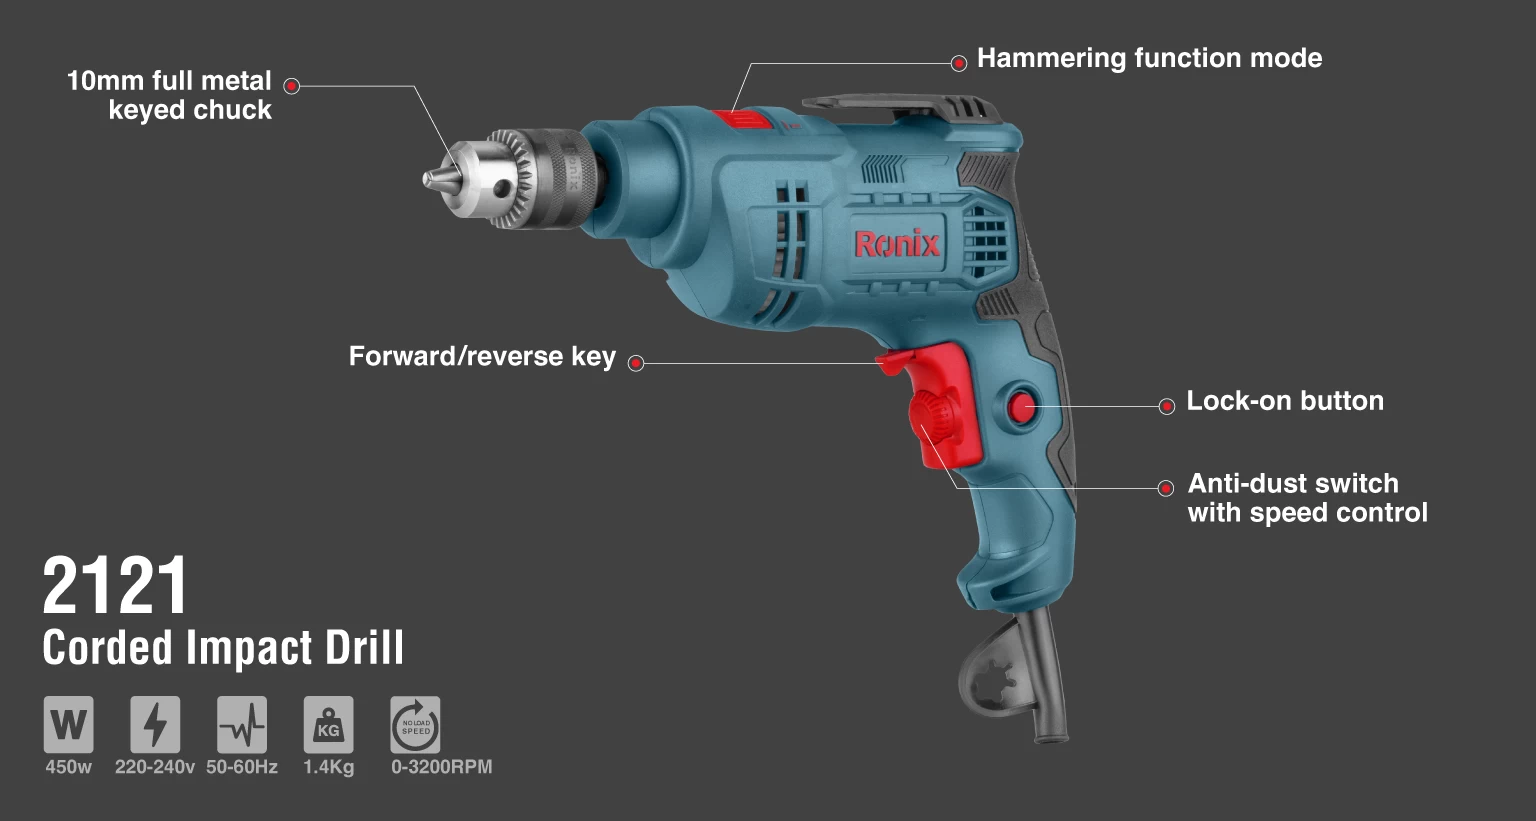 Corded Impact Drill, 450W_details